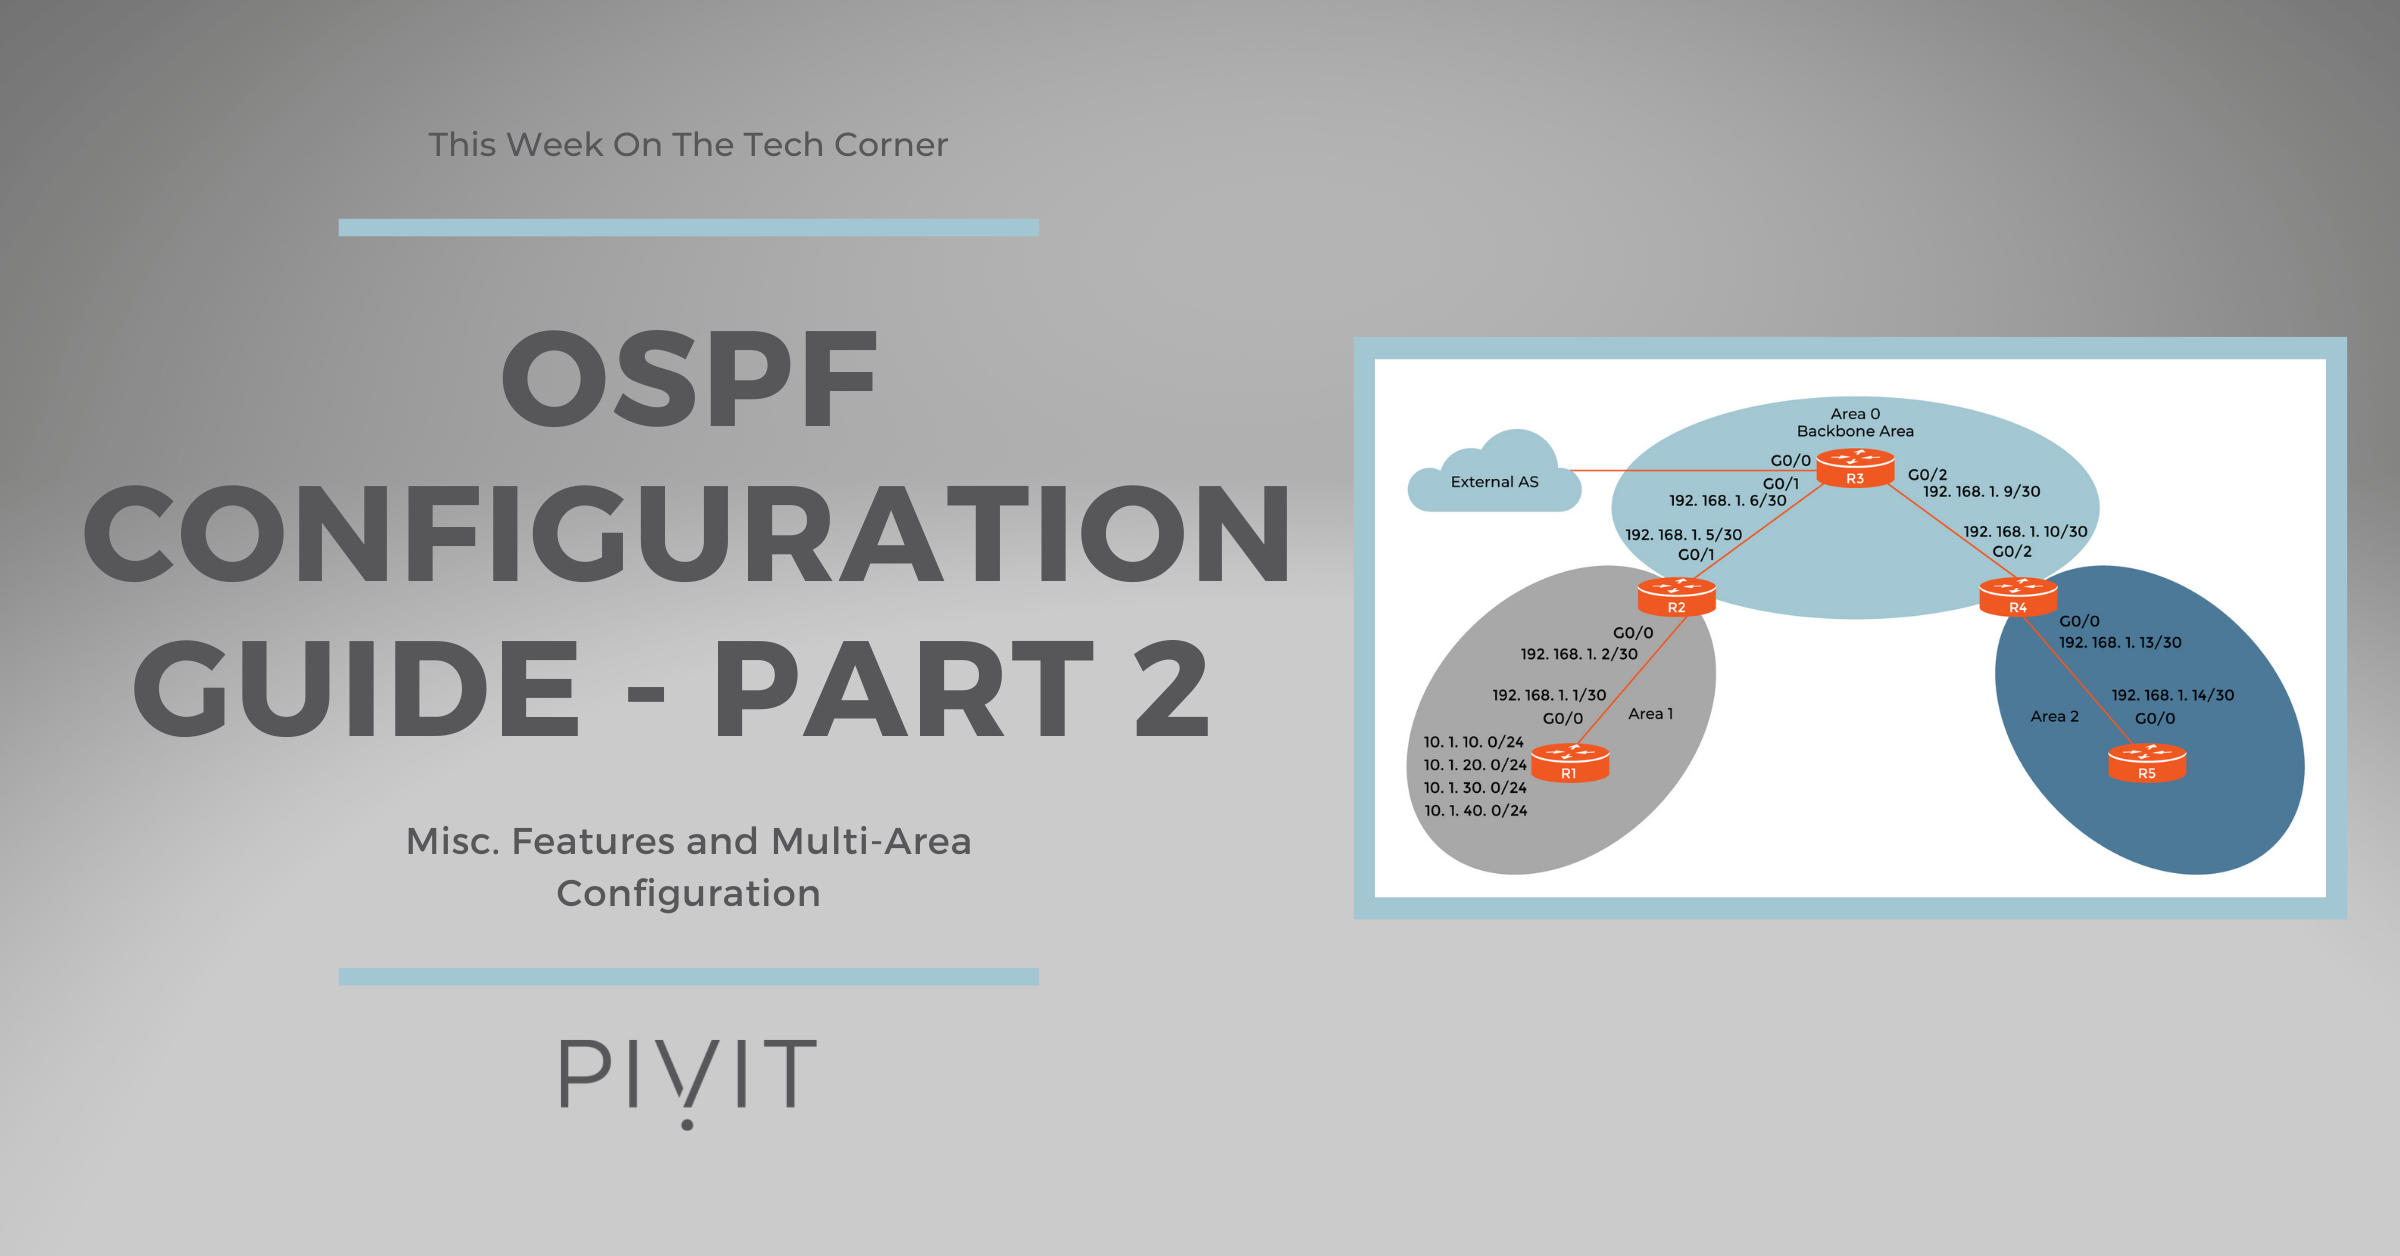 OSPF Configuration Guide (Part 2) – Misc. Features and Multi-Area Configuration